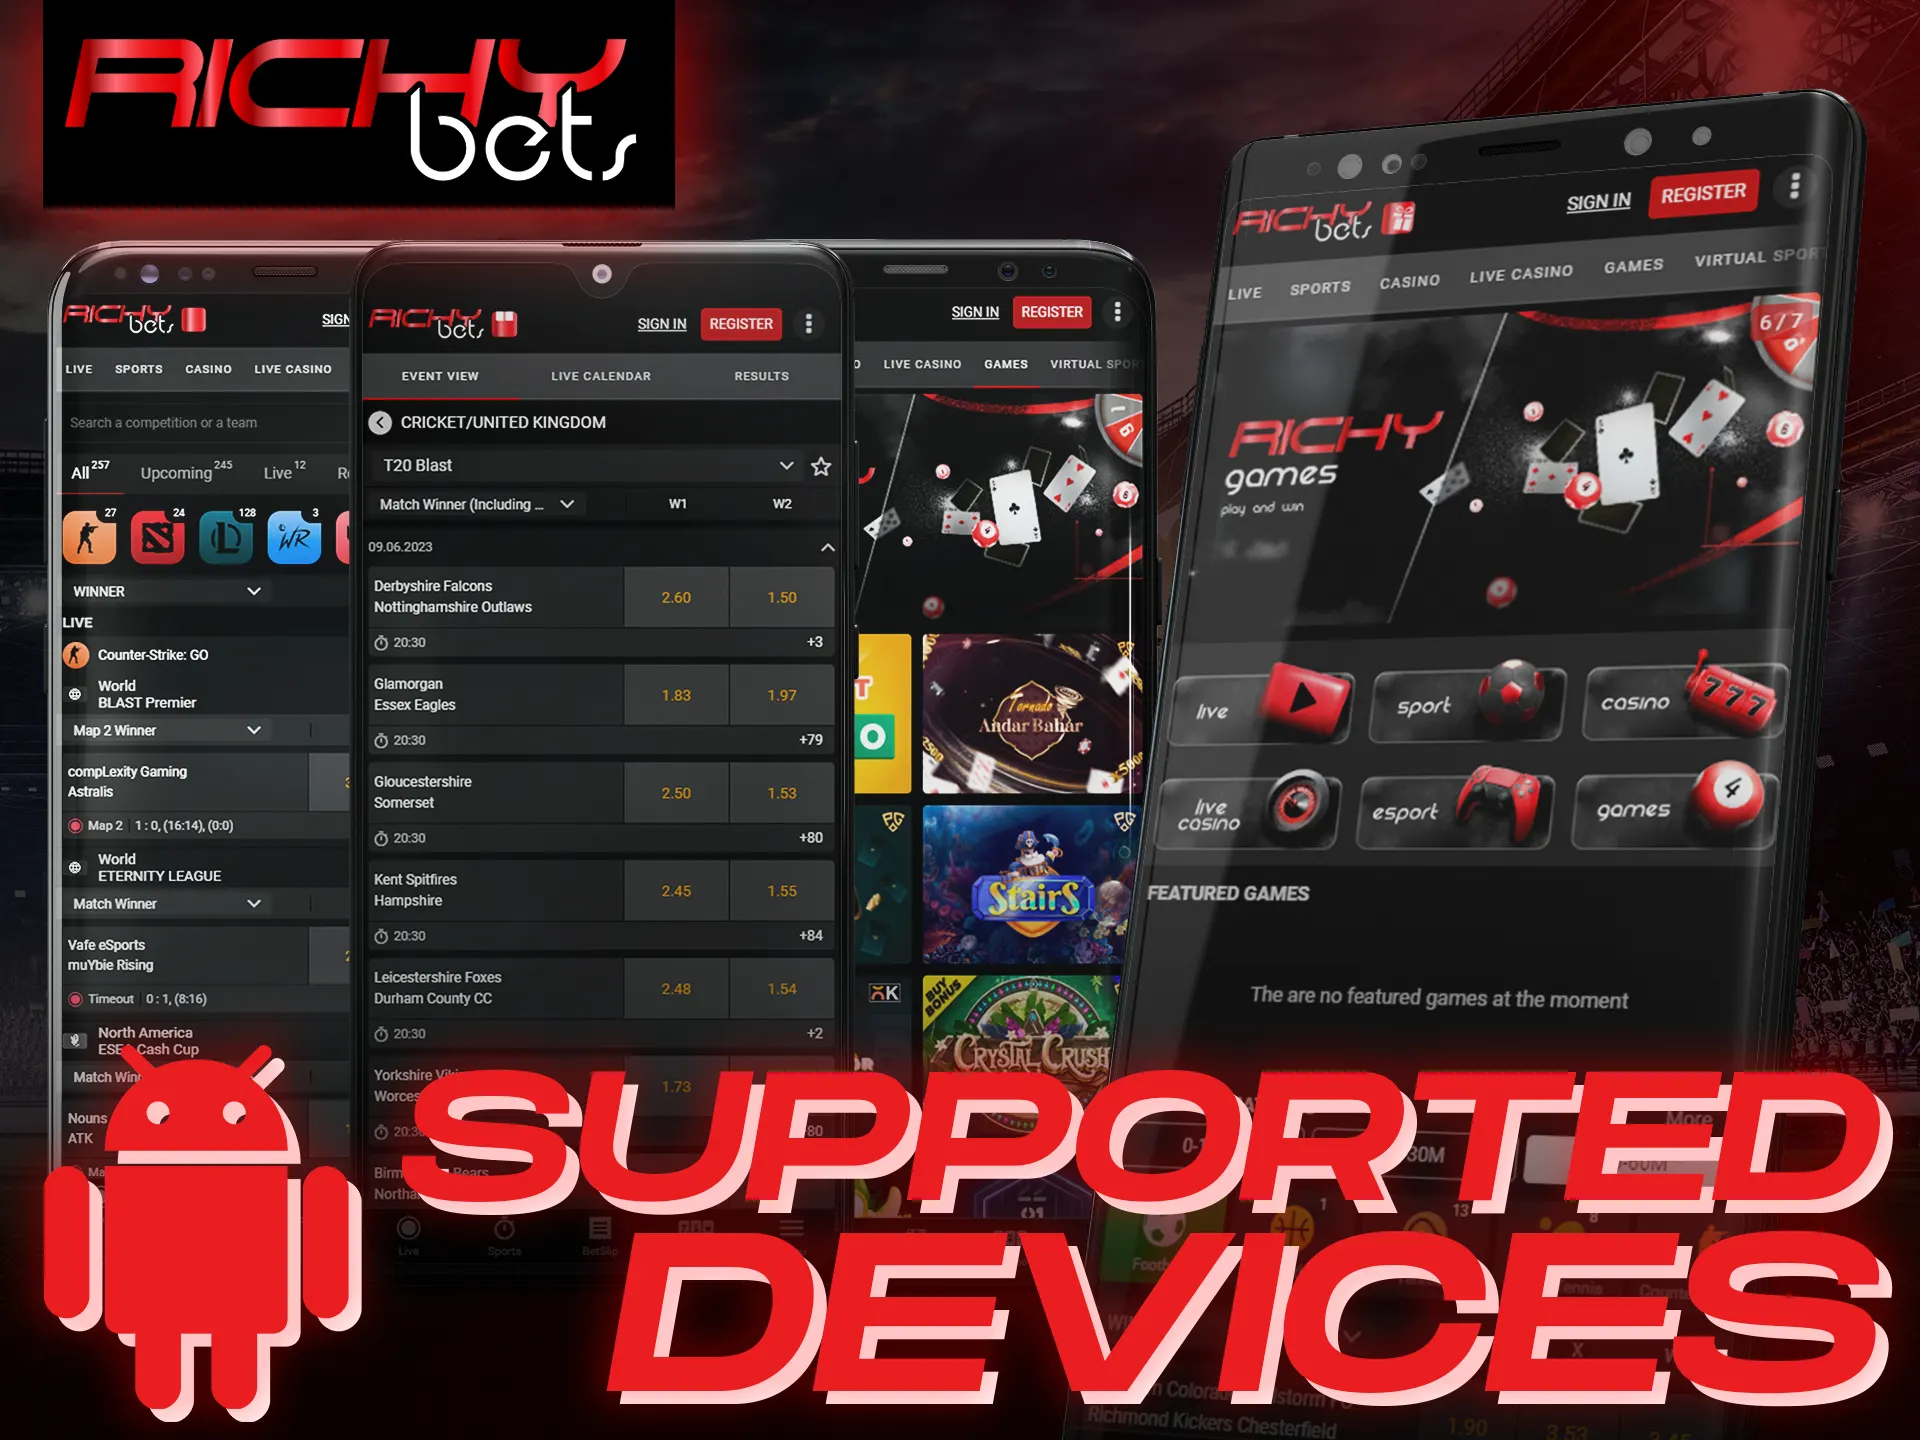 The Richybets Android app is supported by many Android devices.